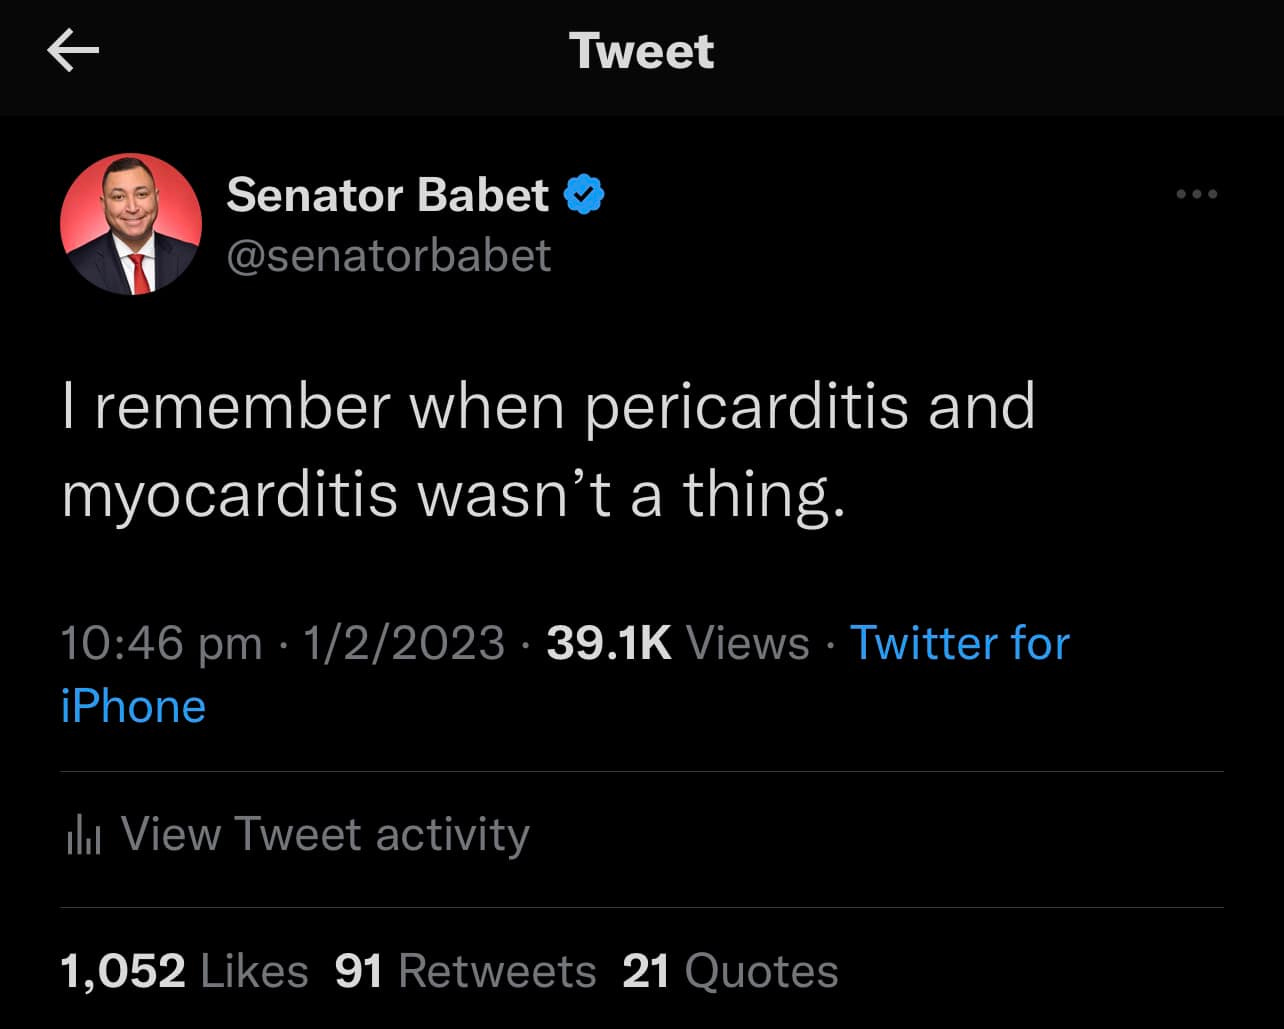 May be a Twitter screenshot of 1 person and text that says "Tweet Senator Babet @senatorbabet remember when pericarditis and myocarditis wasn't a thing. iPhone 1/2/2023 39.1K Views Twitter for ×l× View Tweet activity 1,052 1,05291Rw Likes 91 Retweets 21 Quotes"